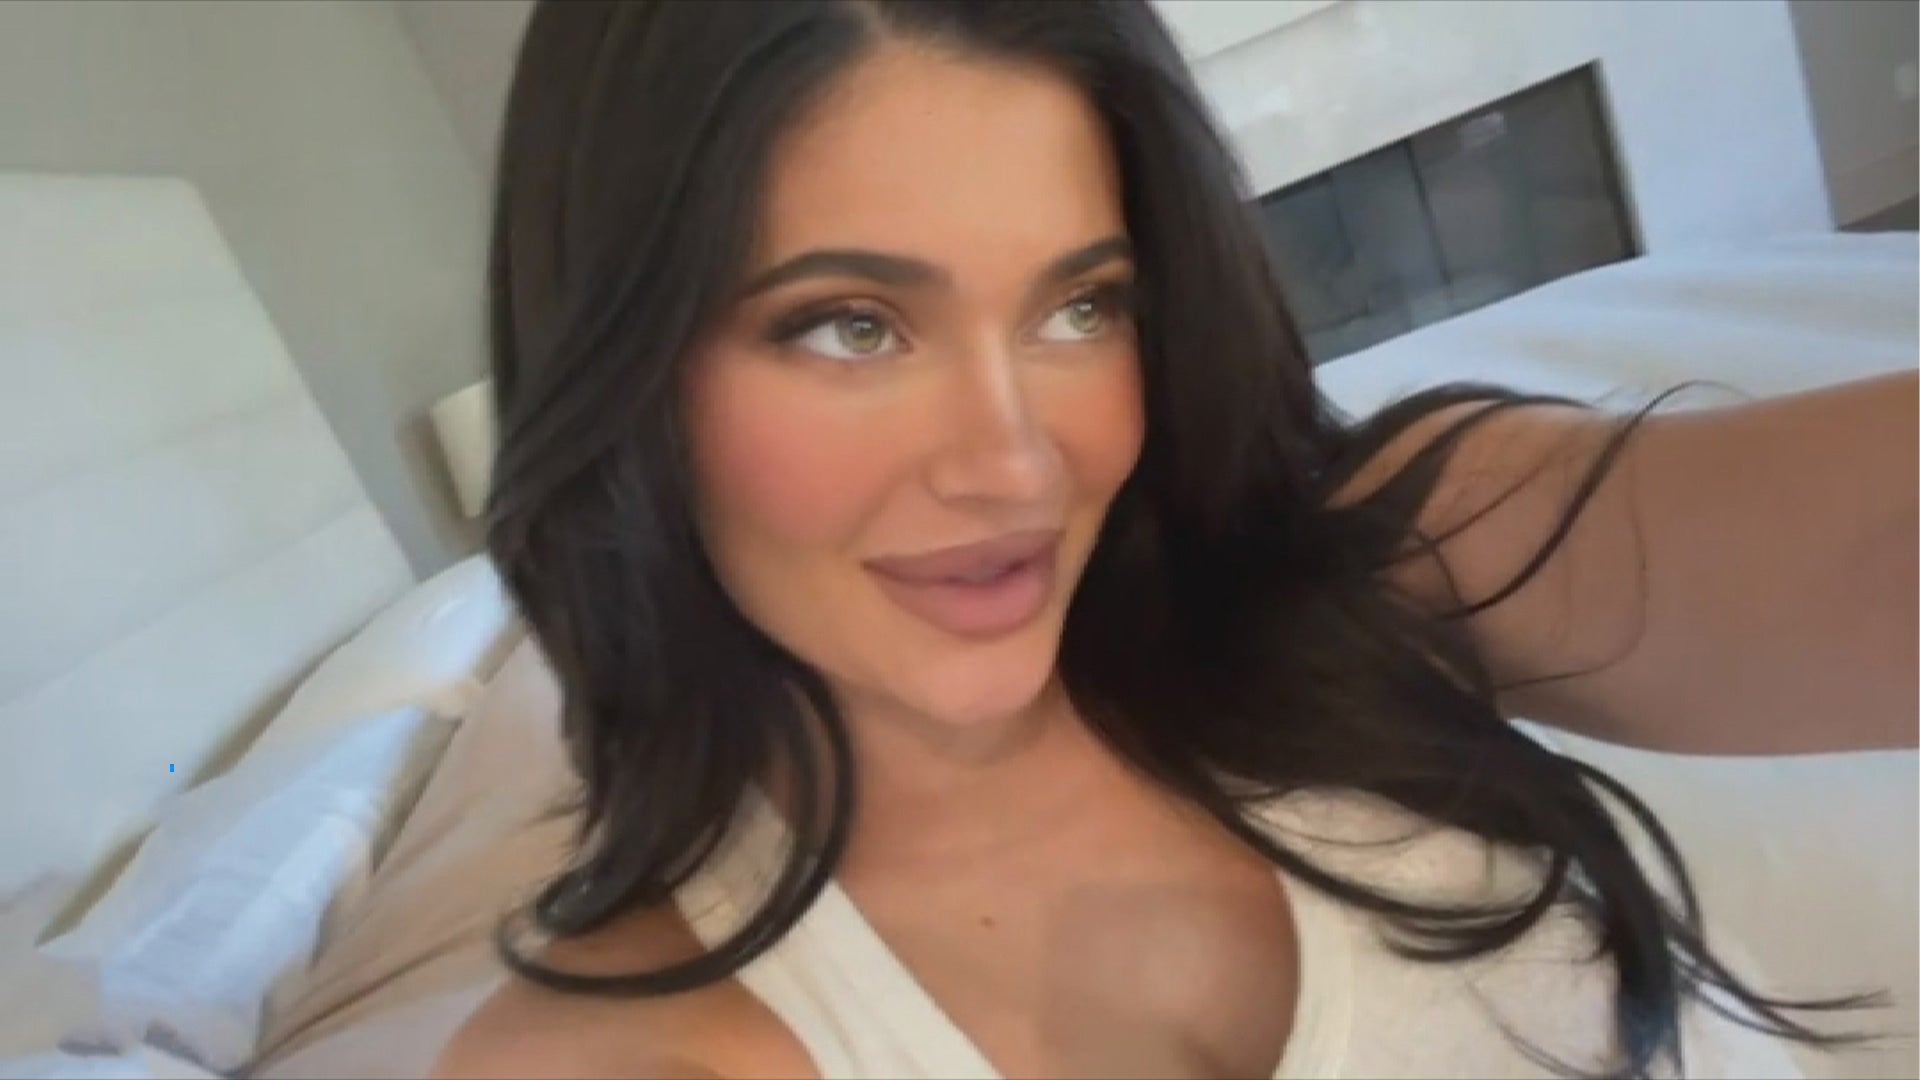 Kylie Jenner Lip Dubs a Travis Scott Song on TikTok and Opens Up About Postpartum Struggles